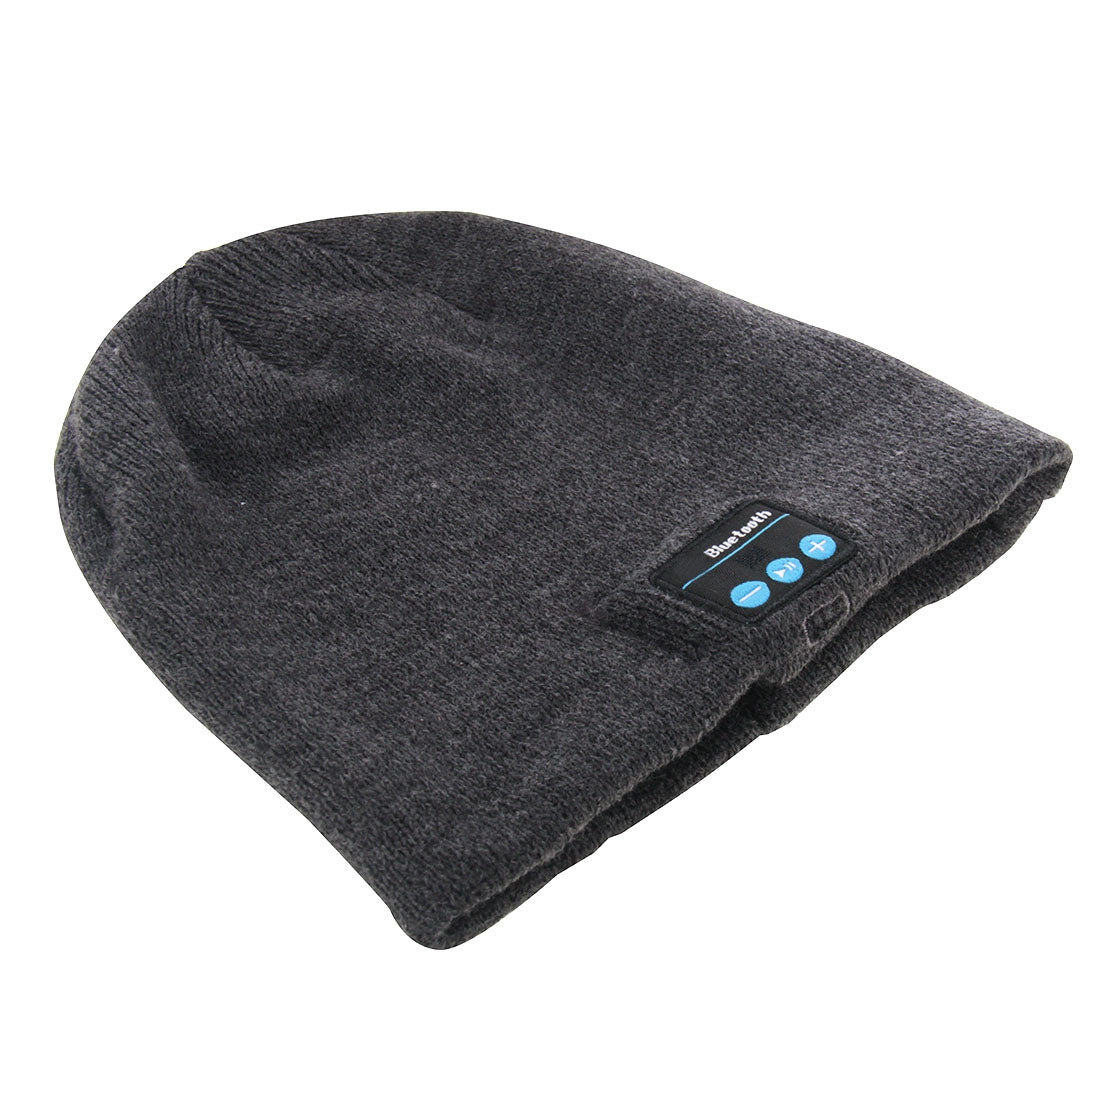 AMZER Bluetooth Beanie Wireless Headphone Knitted Warm Winter Cap Hat with Mic (Random Color)